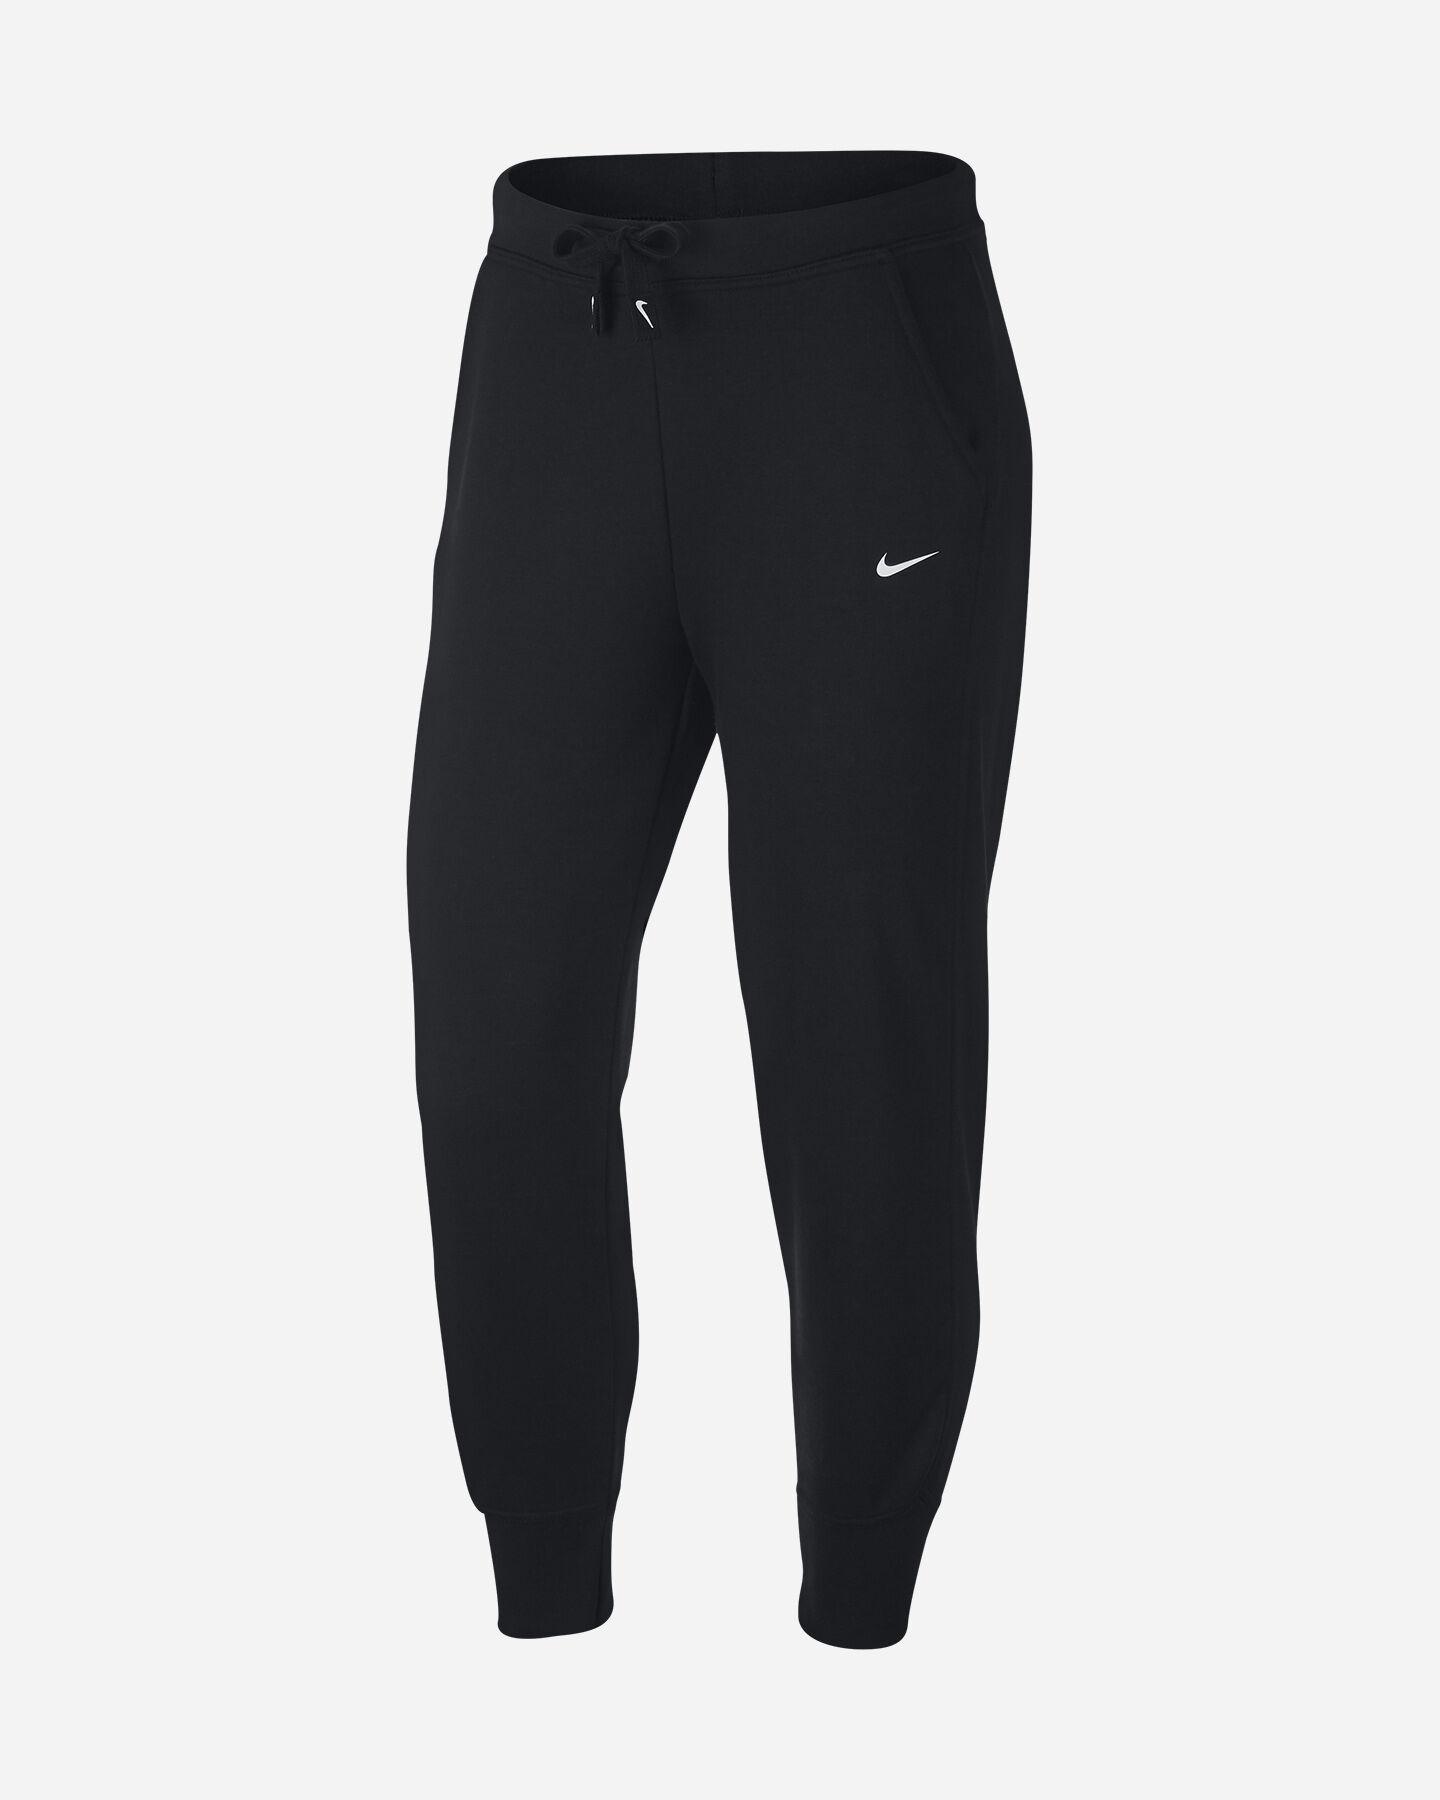  Pantalone training NIKE DRY GET FIT W S5268717 scatto 0